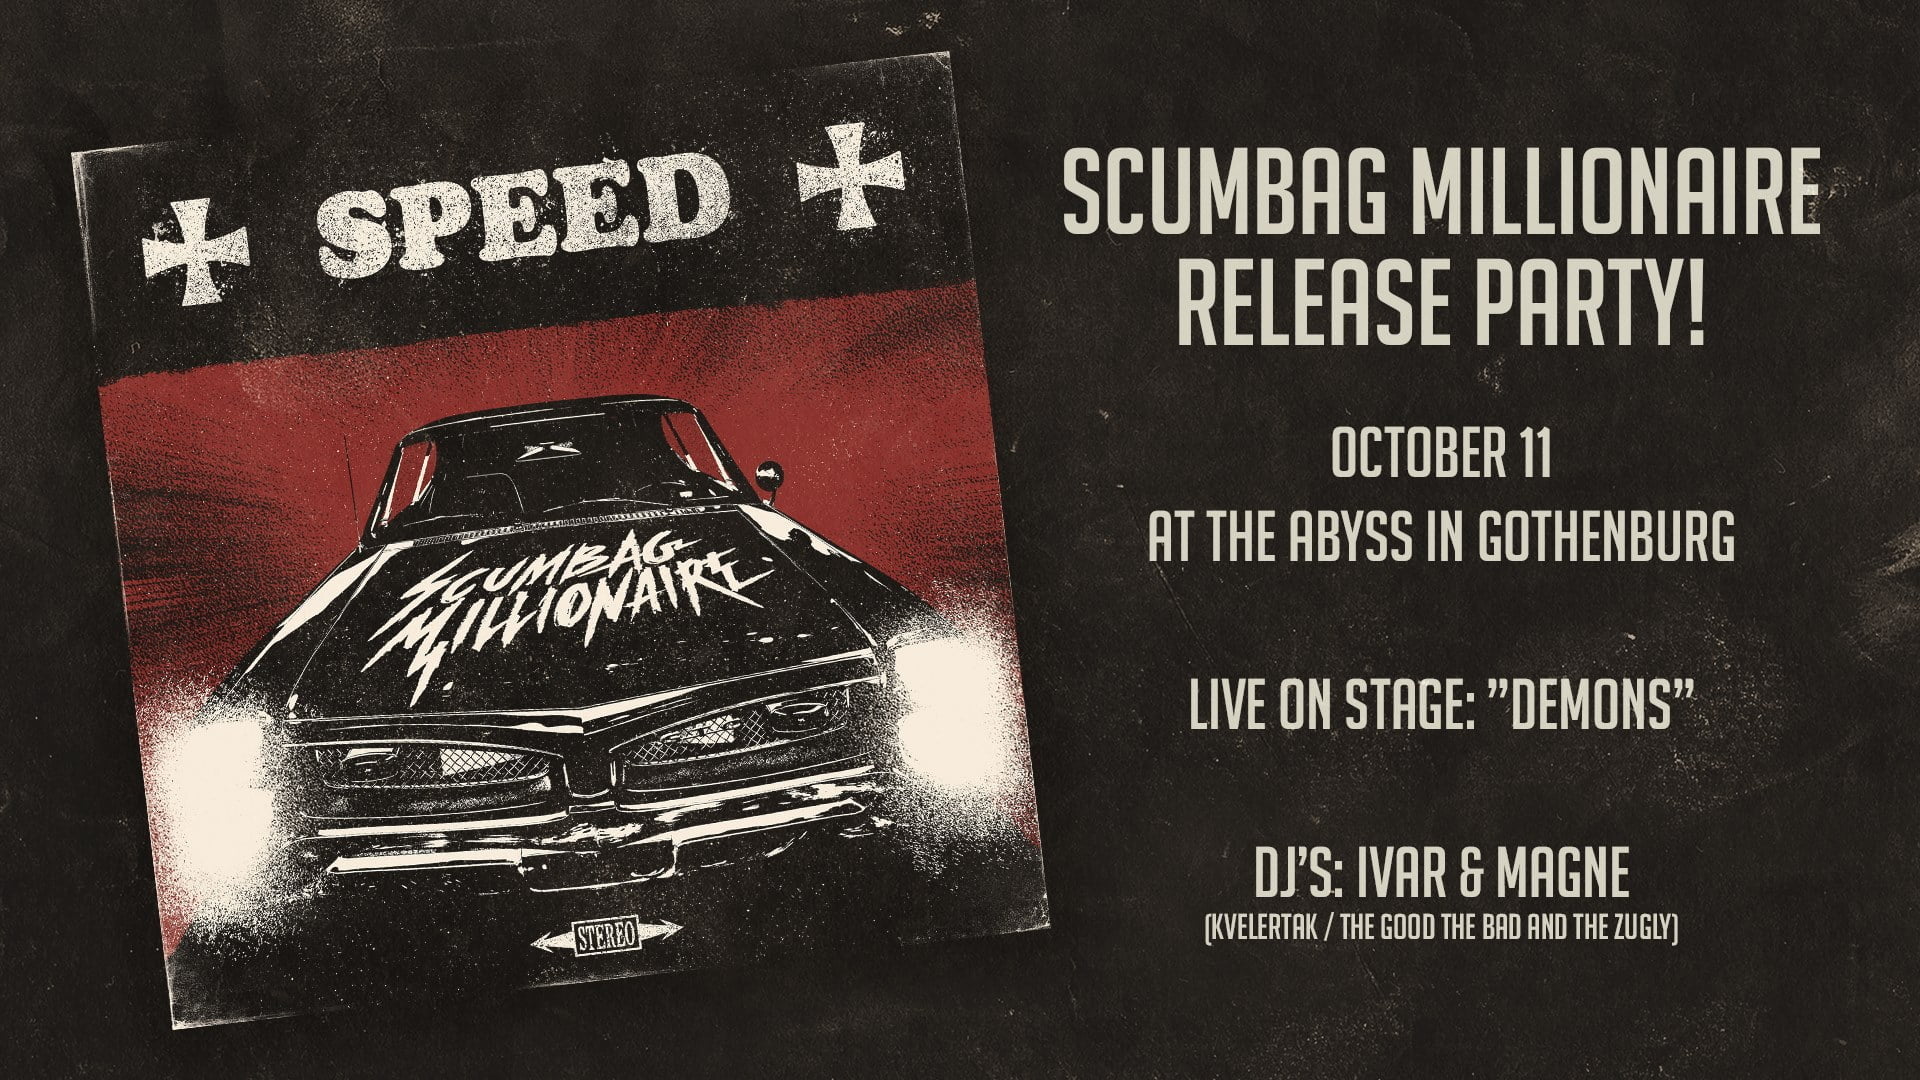 The Abyss - Scumbag Millionaire - release party